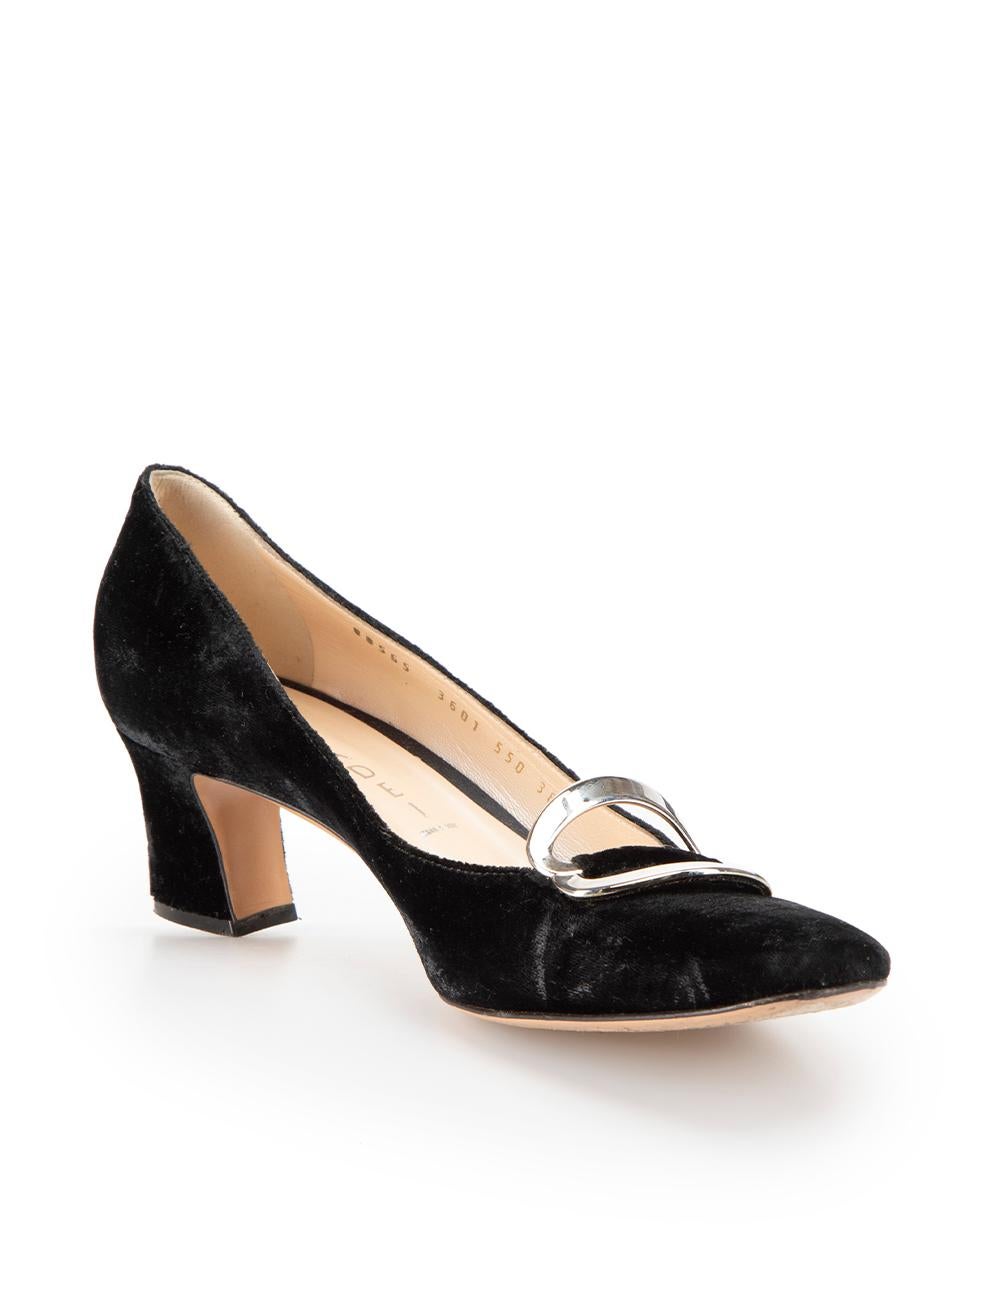 CONDITION is Very good. Minimal wear to shoes is evident. Minimal wear to both heels with scuffs to the velvet on this used Casadei designer resale item.



Details


Black

Velvet

Slip-on pumps

Square-toe

Kitten heel

Silver buckle